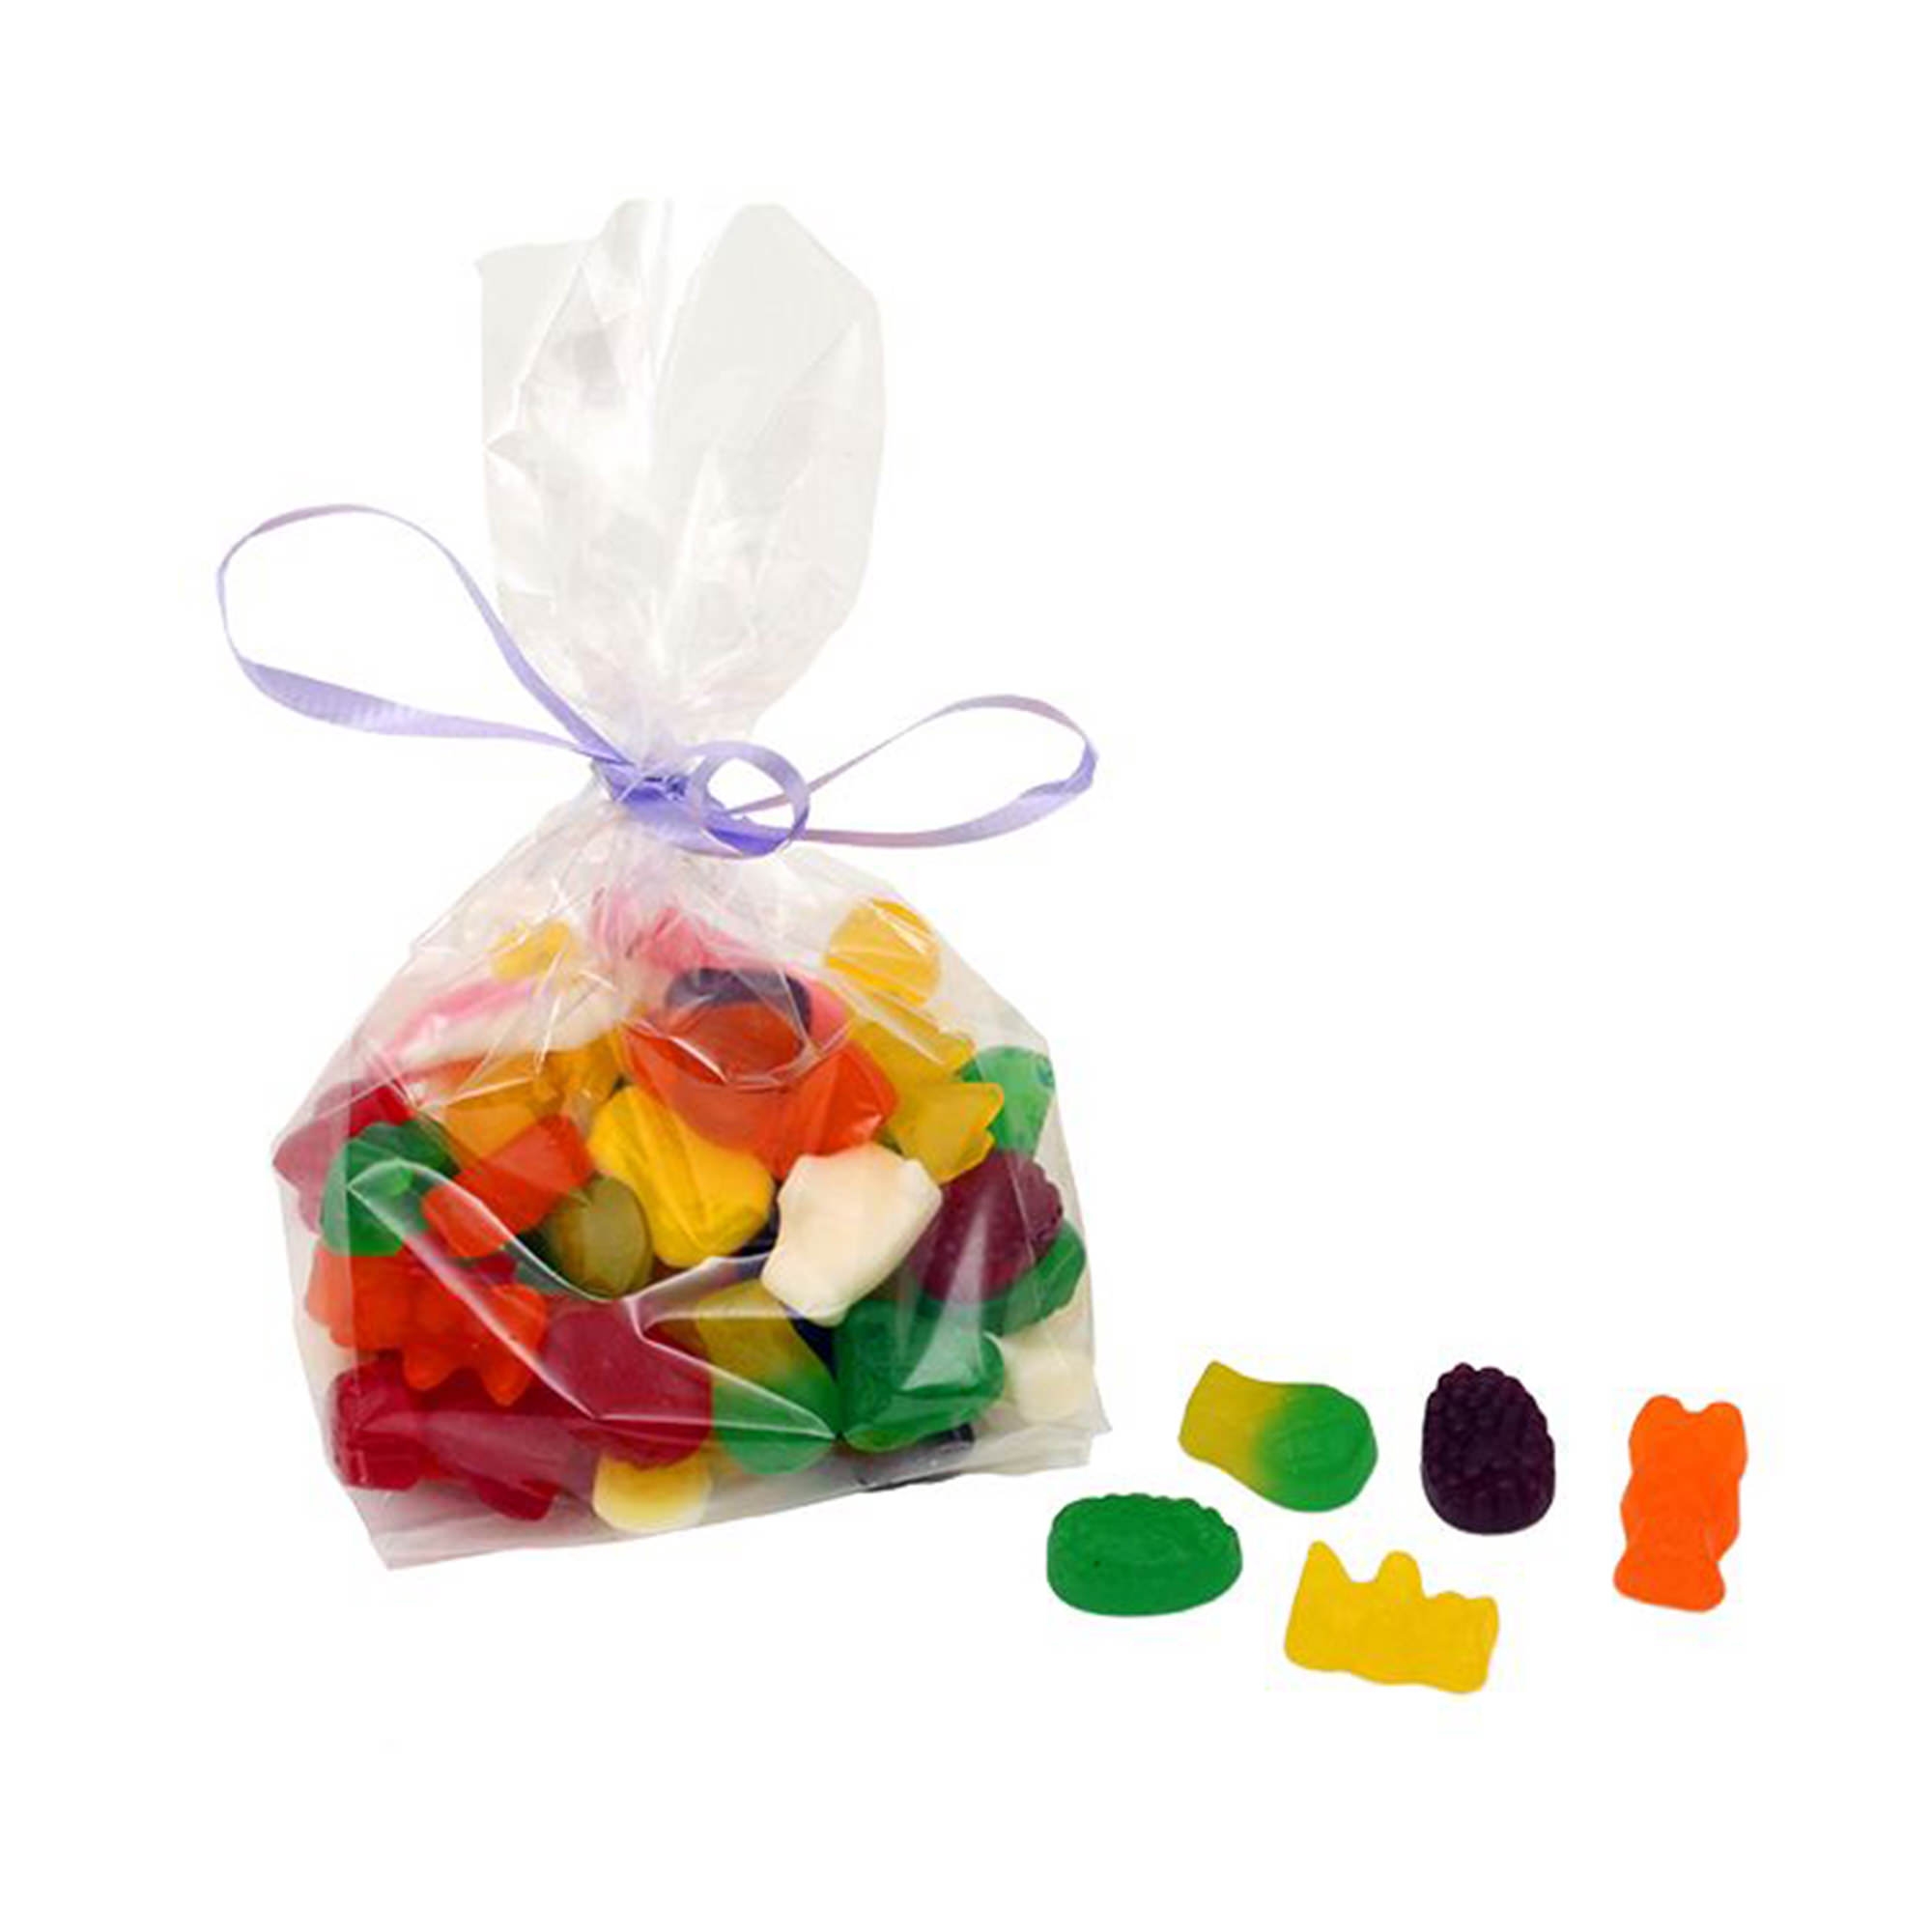 Appetito 20pk Sweets Bag Clear Image 2